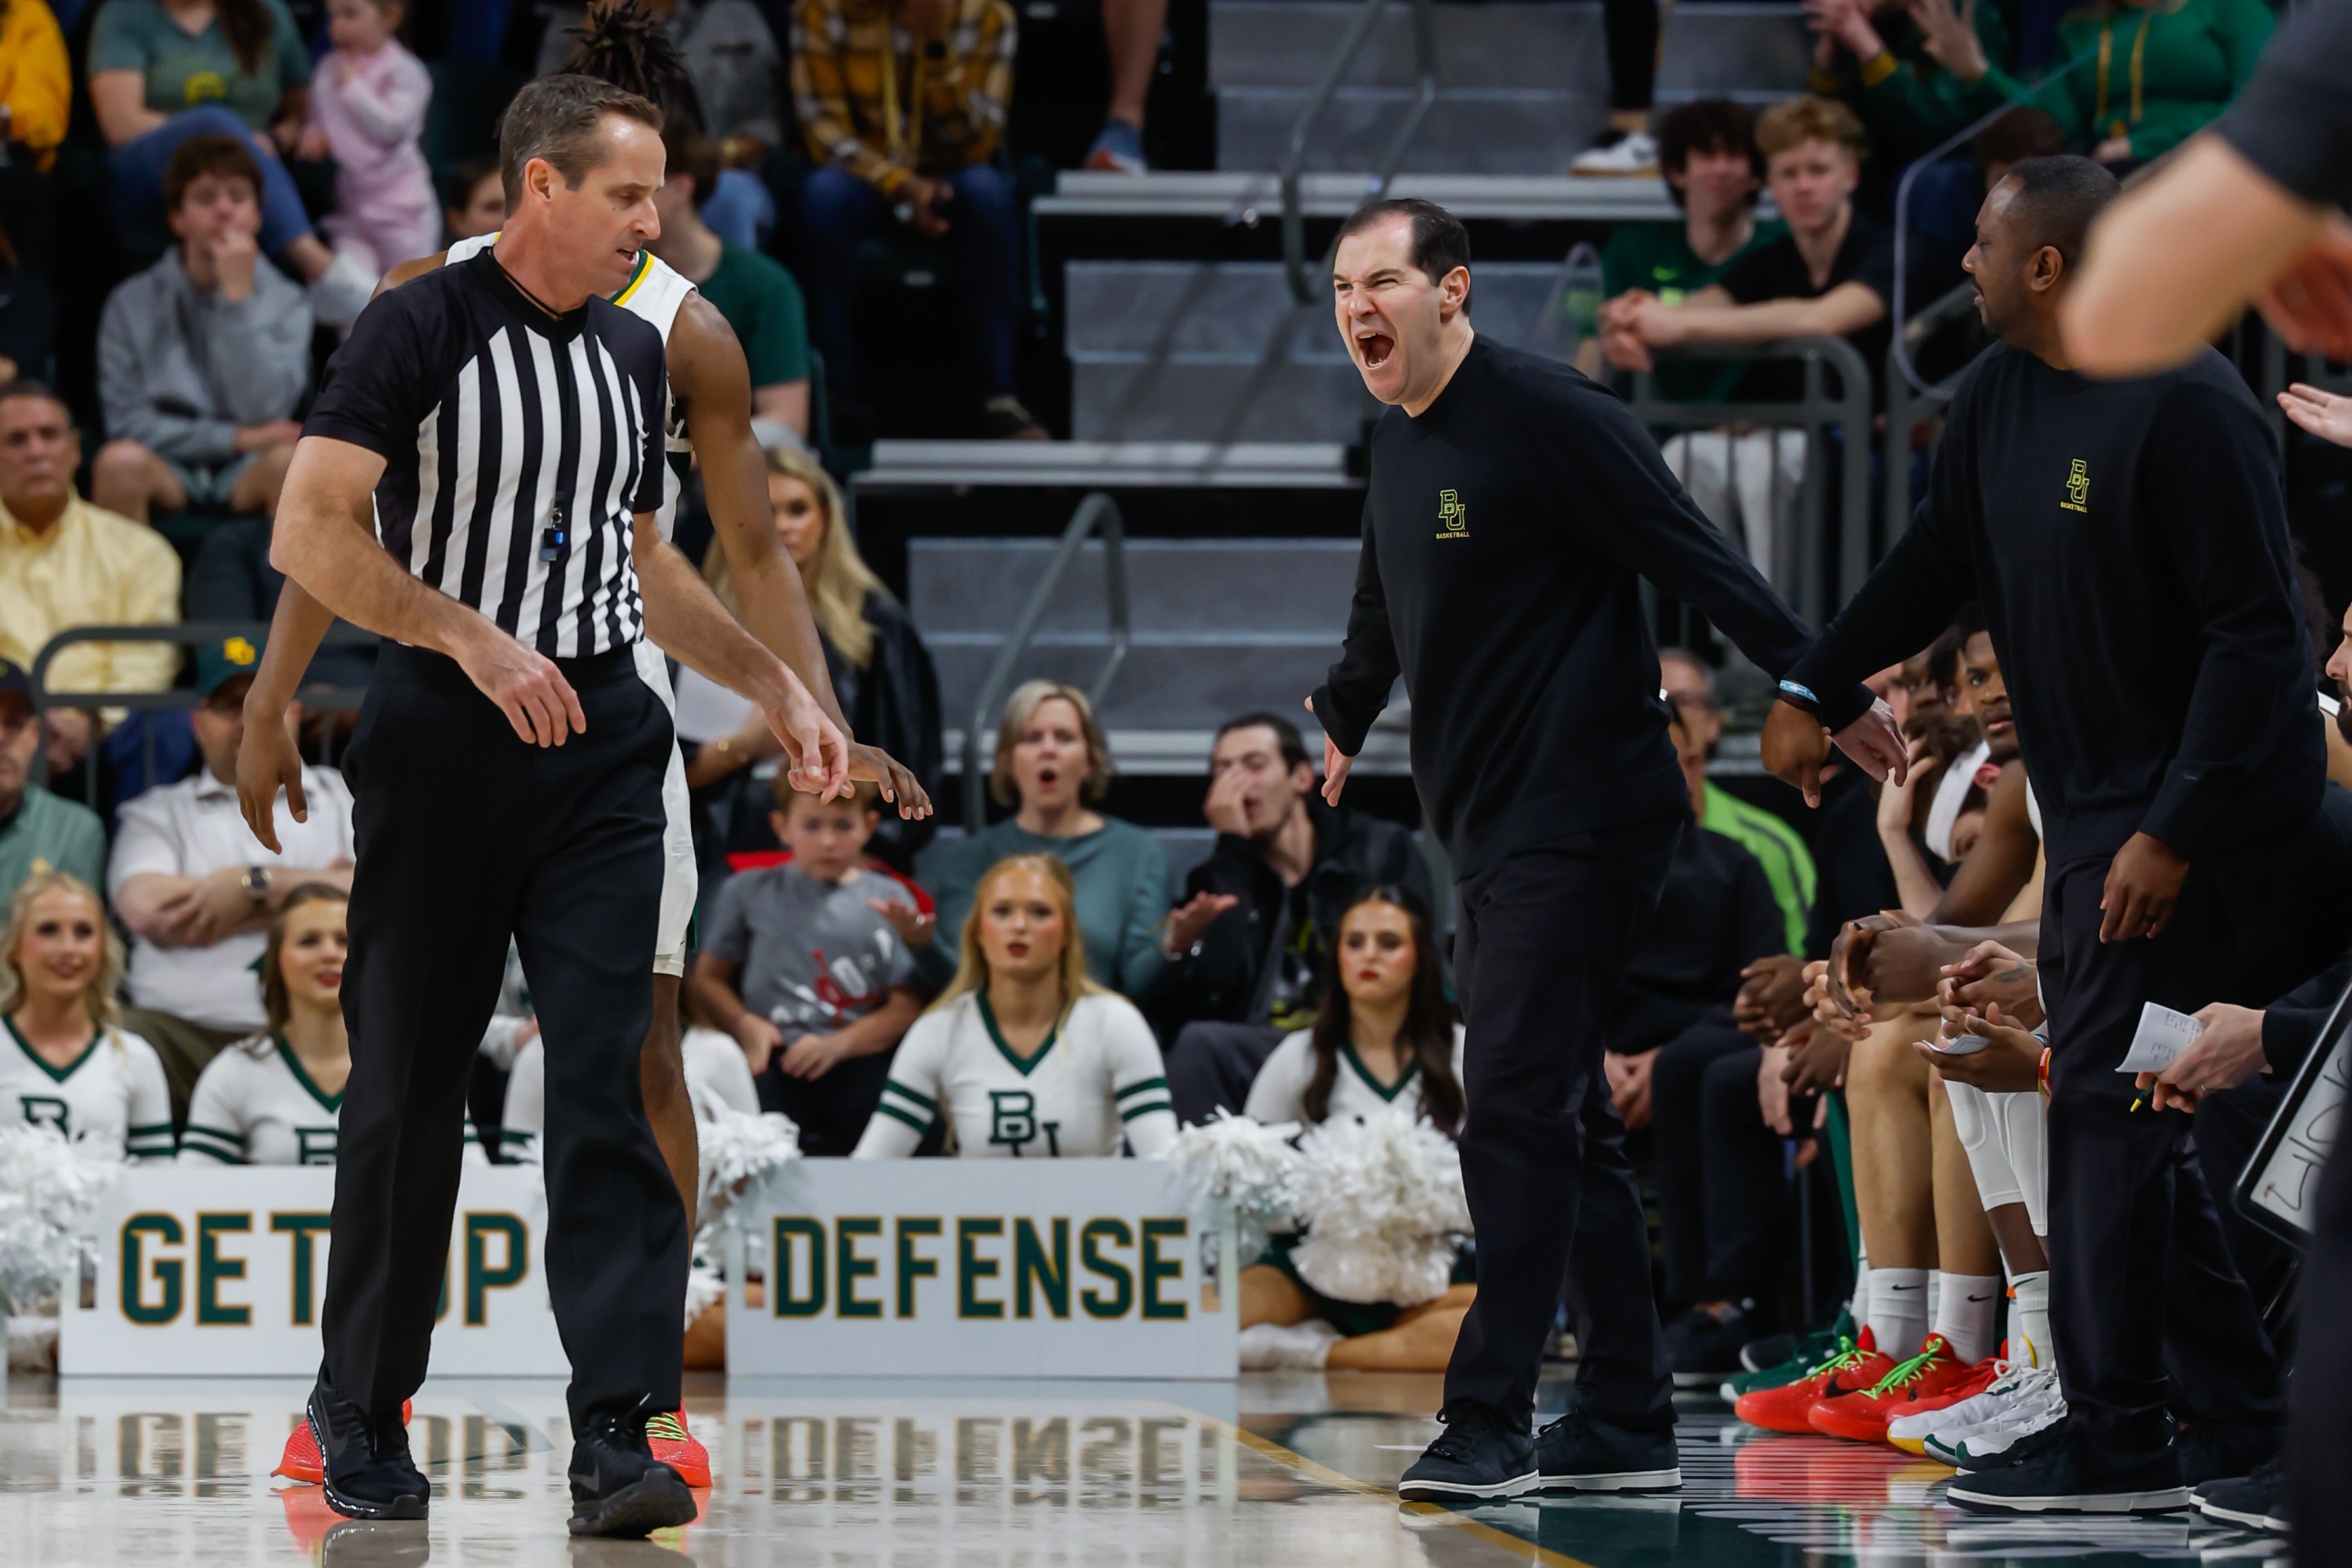 Baylor Bears head coach Scott Drew yells after being called for a technical foul during the Big 12 college basketball game between Baylor Bears and Iowa State Cyclones on February 3, 2024, at Foster Pavilion in Waco, Texas.